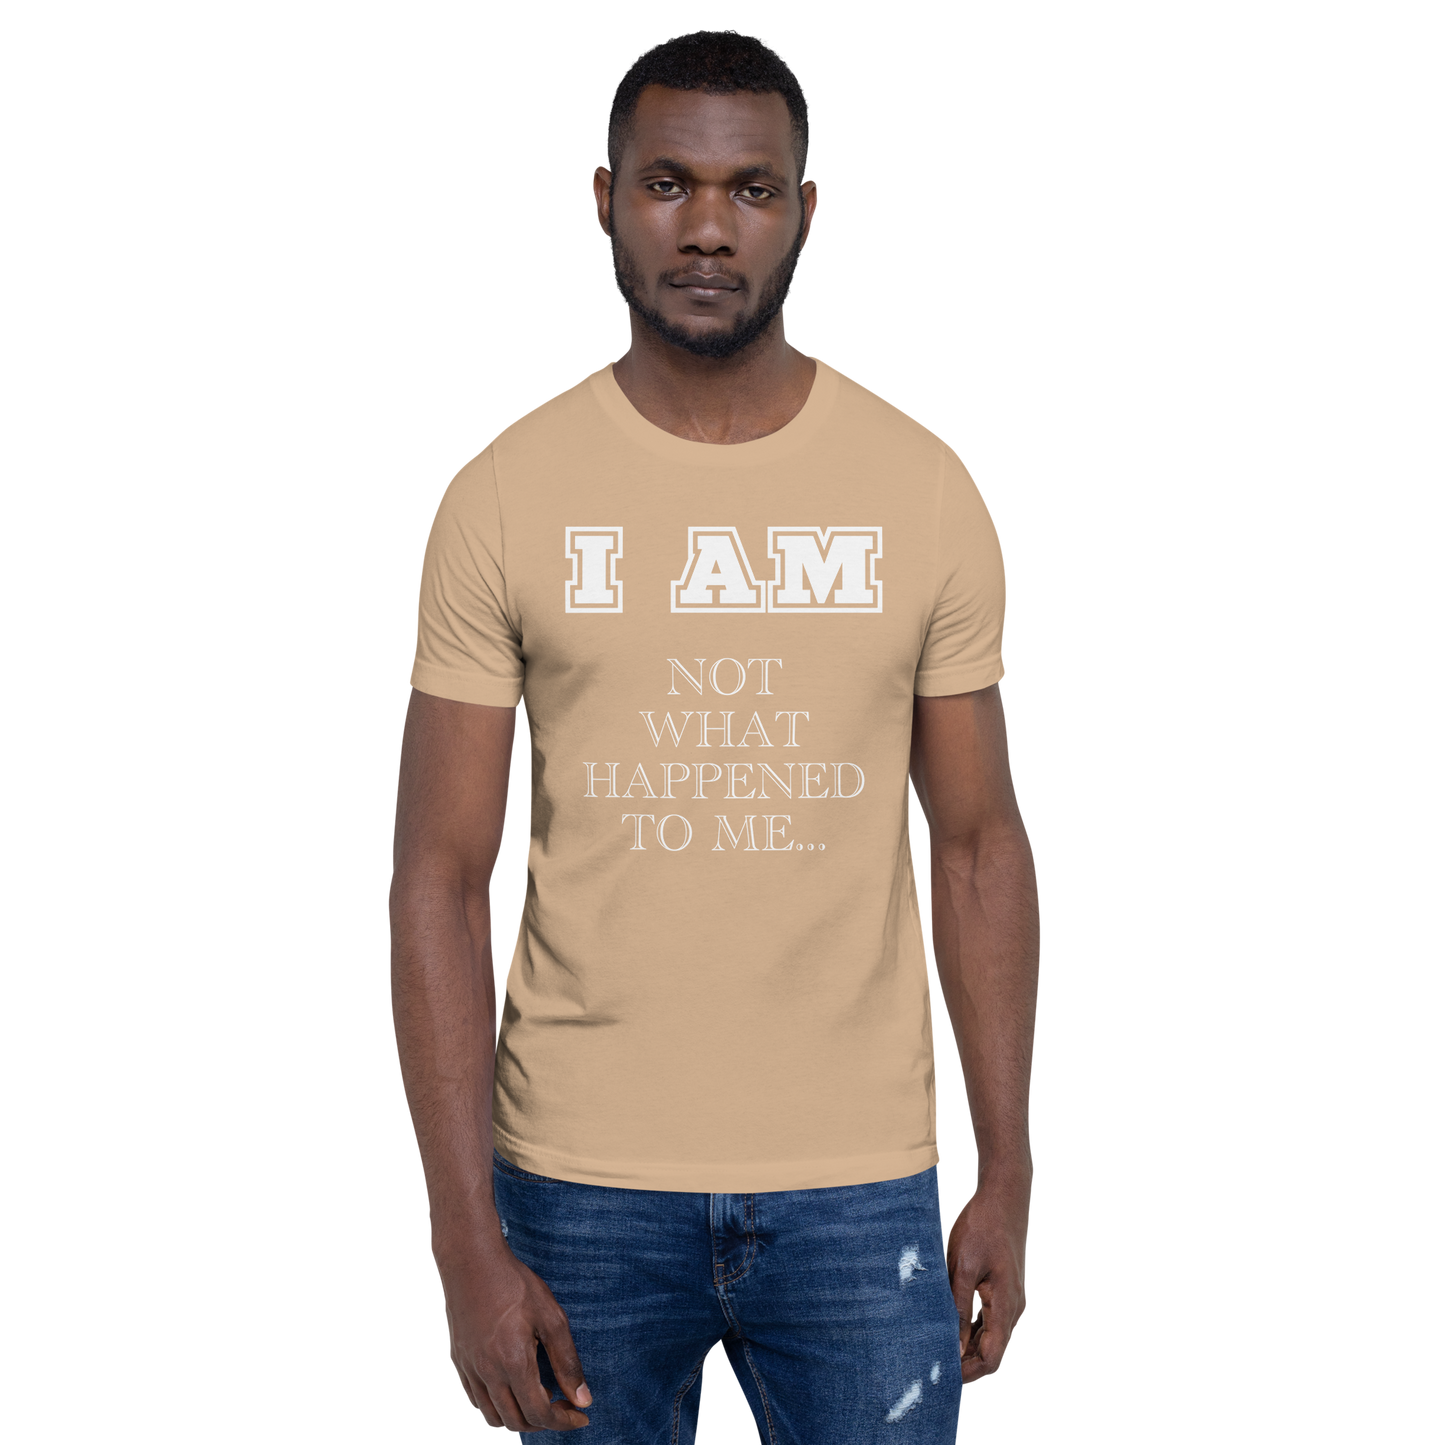 I AM what I Choose to become t-shirt